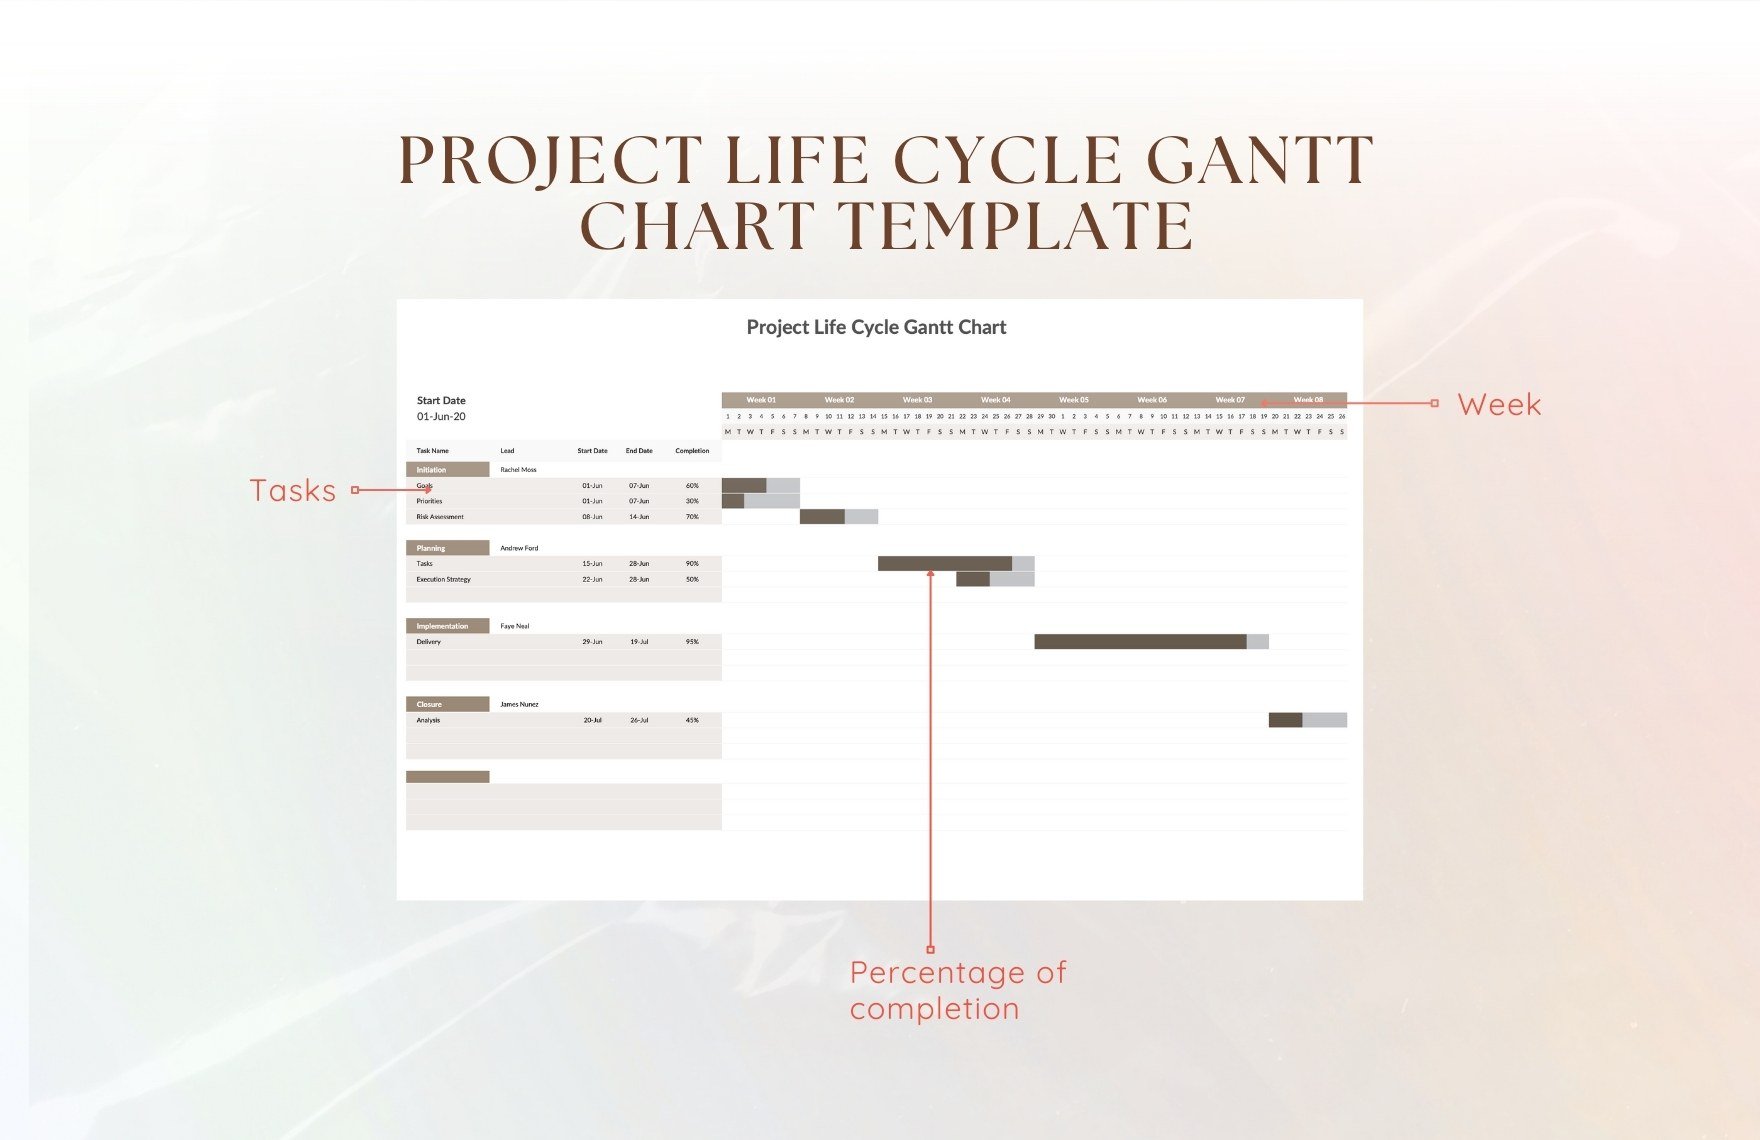 Project Life Cycle Gantt Chart Template